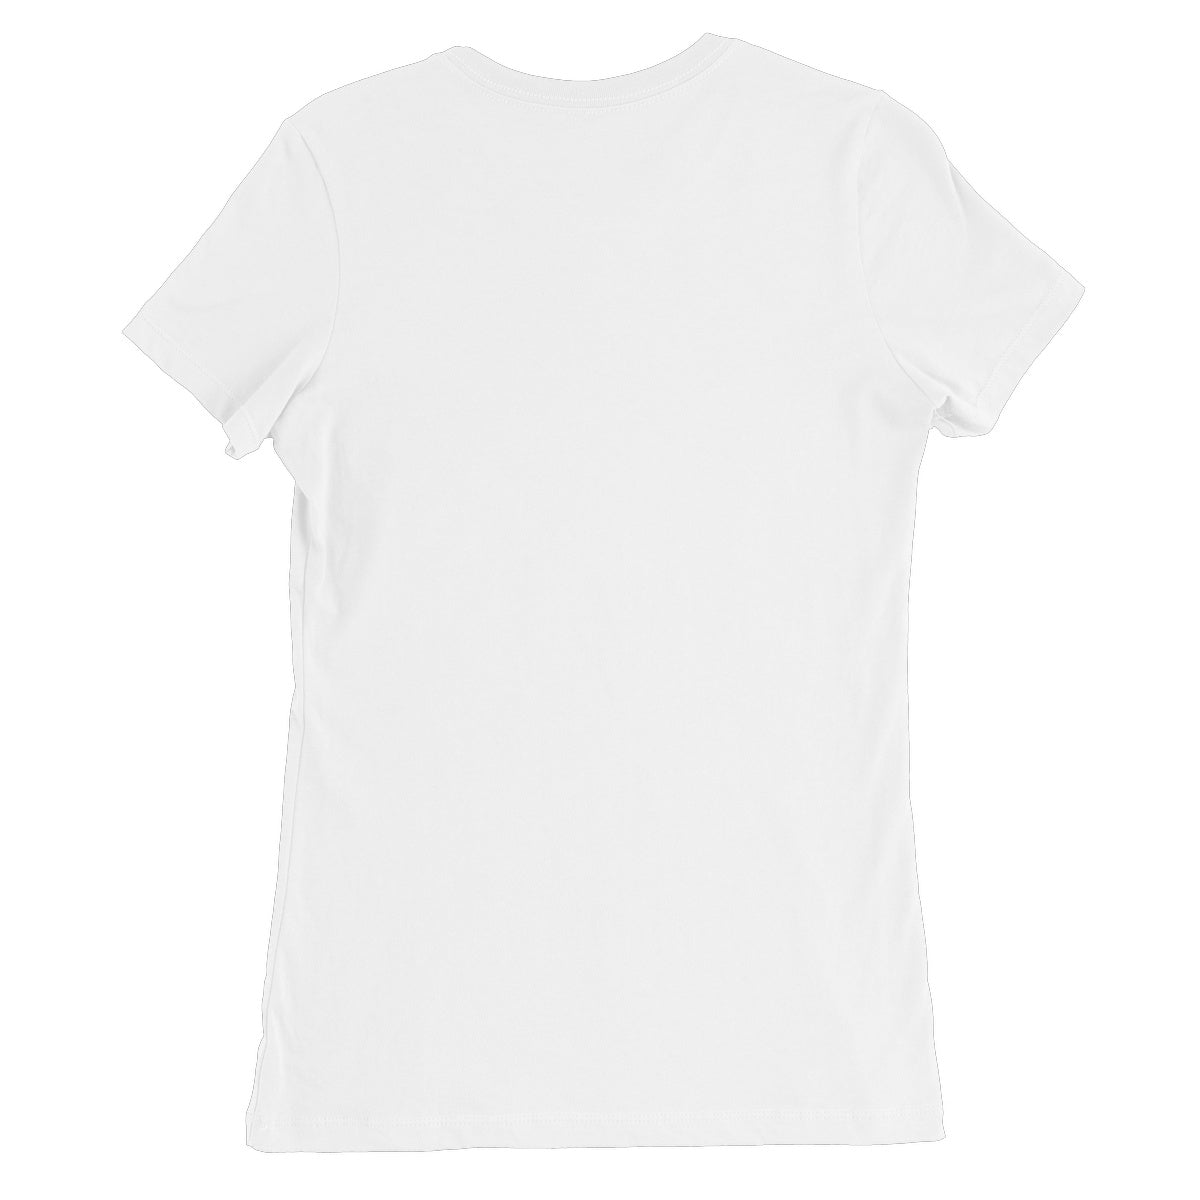 Guitar Neck and Strings Women's T-Shirt